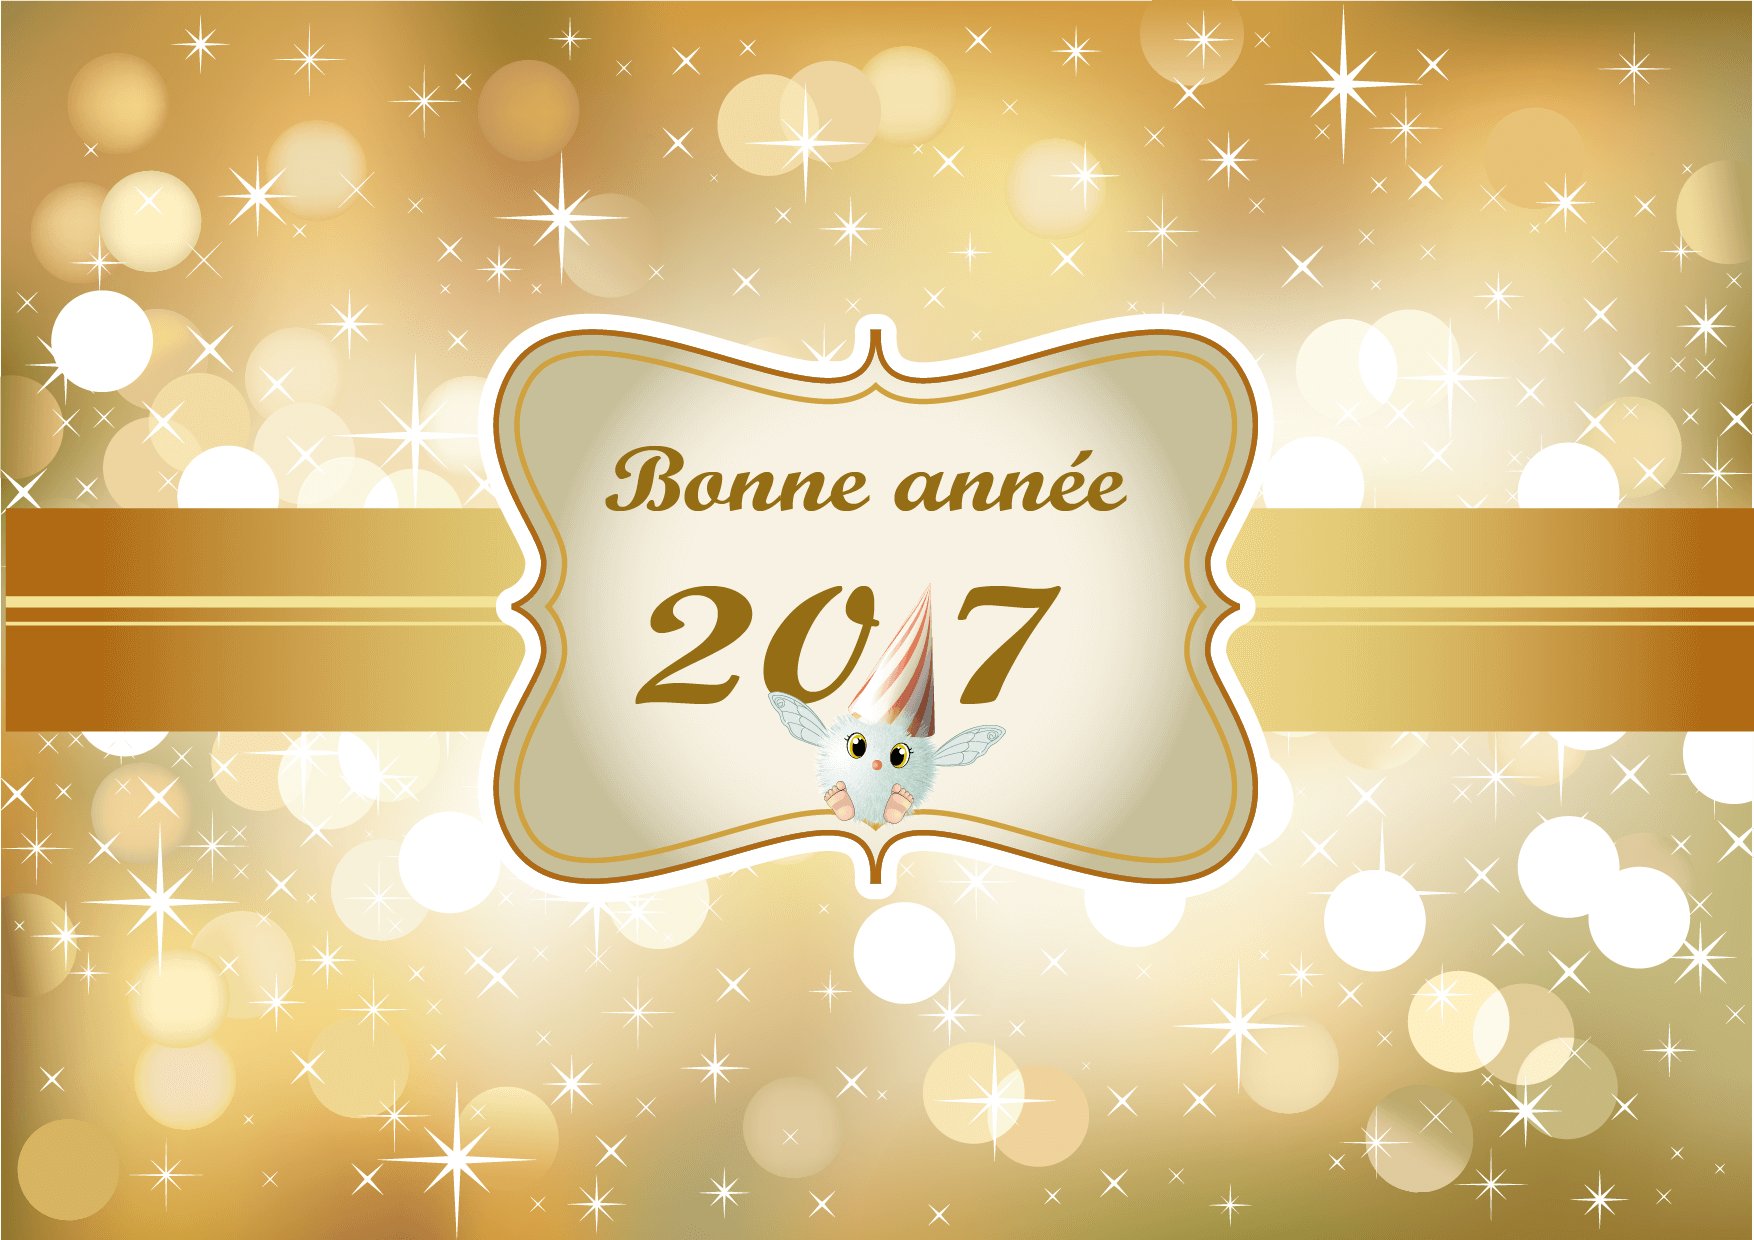 bonne-annee-2017-structure-gonflable.png